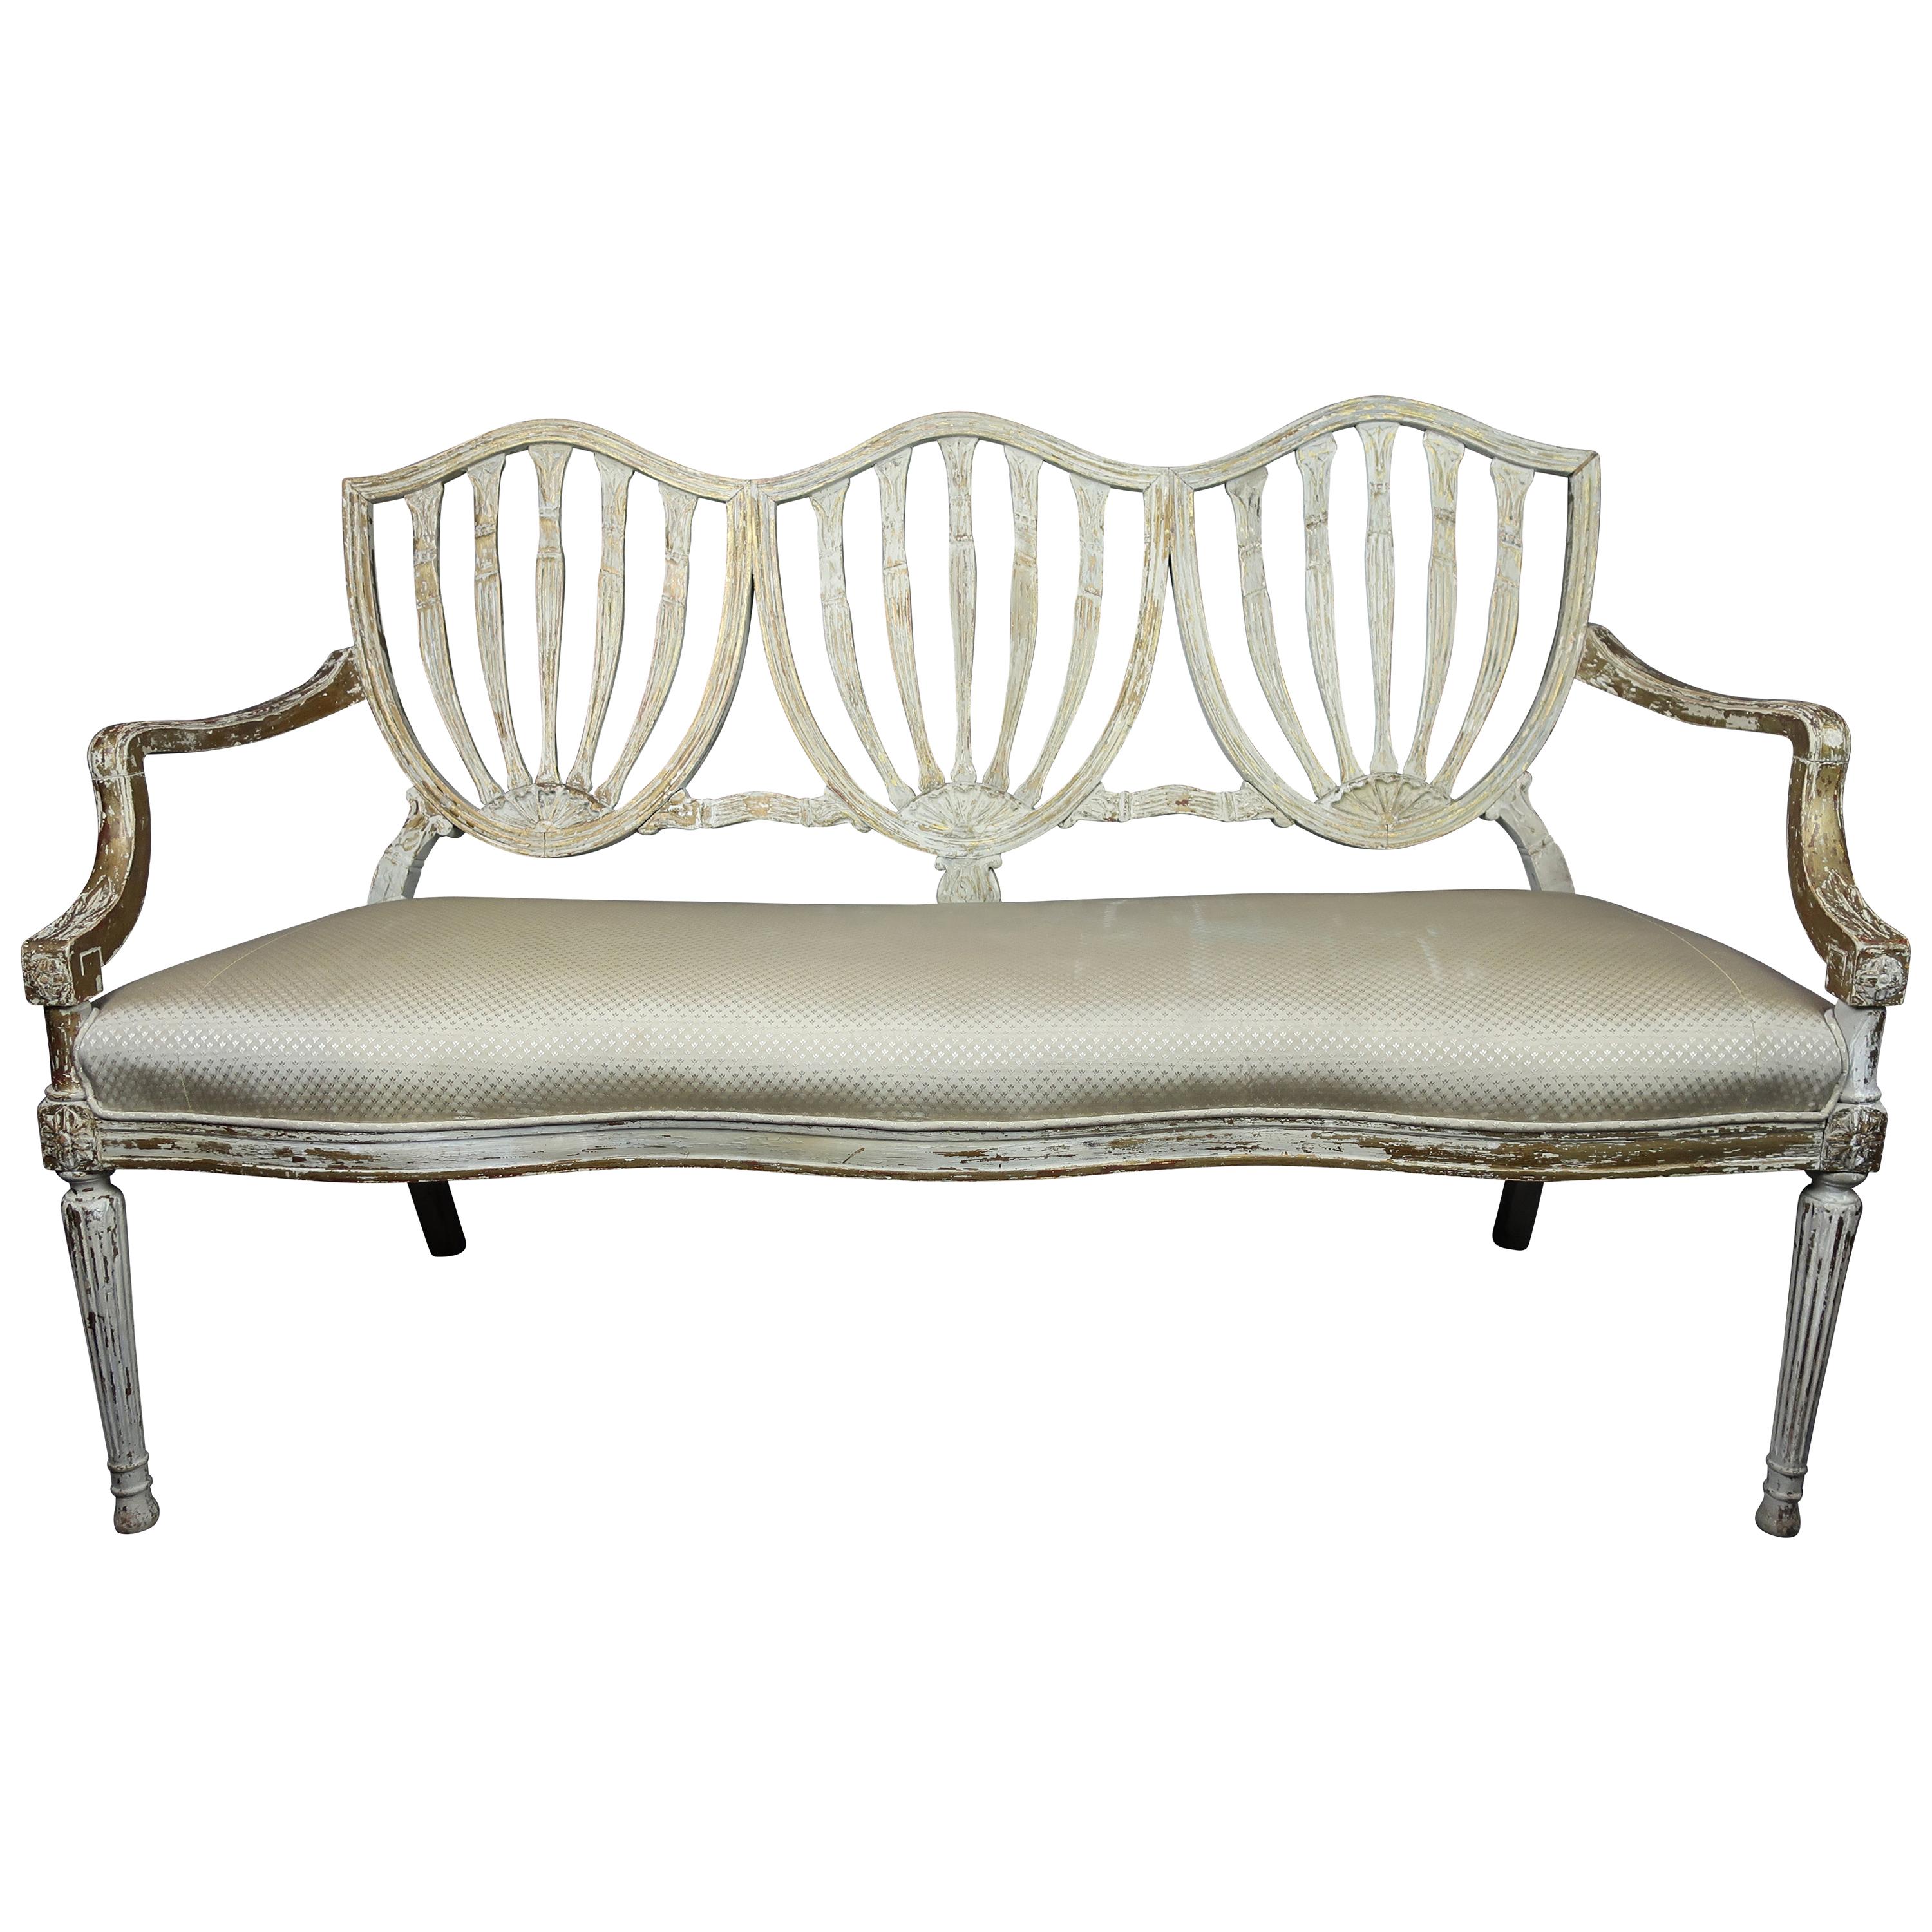  White and Gilt Painted Settee Sheraton Style Shield Back